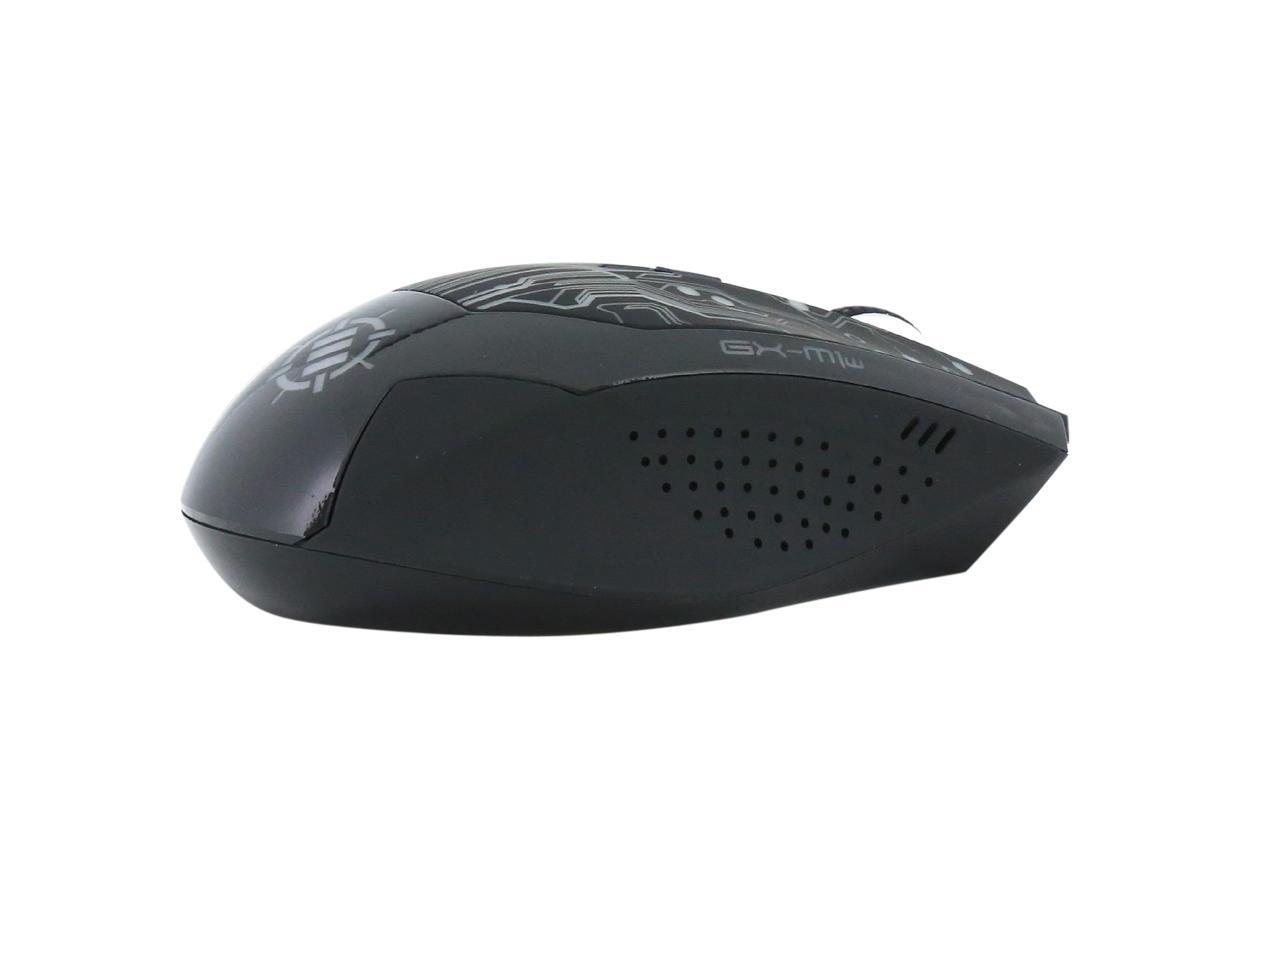 how to change battery in microsoft wireless mouse 3500